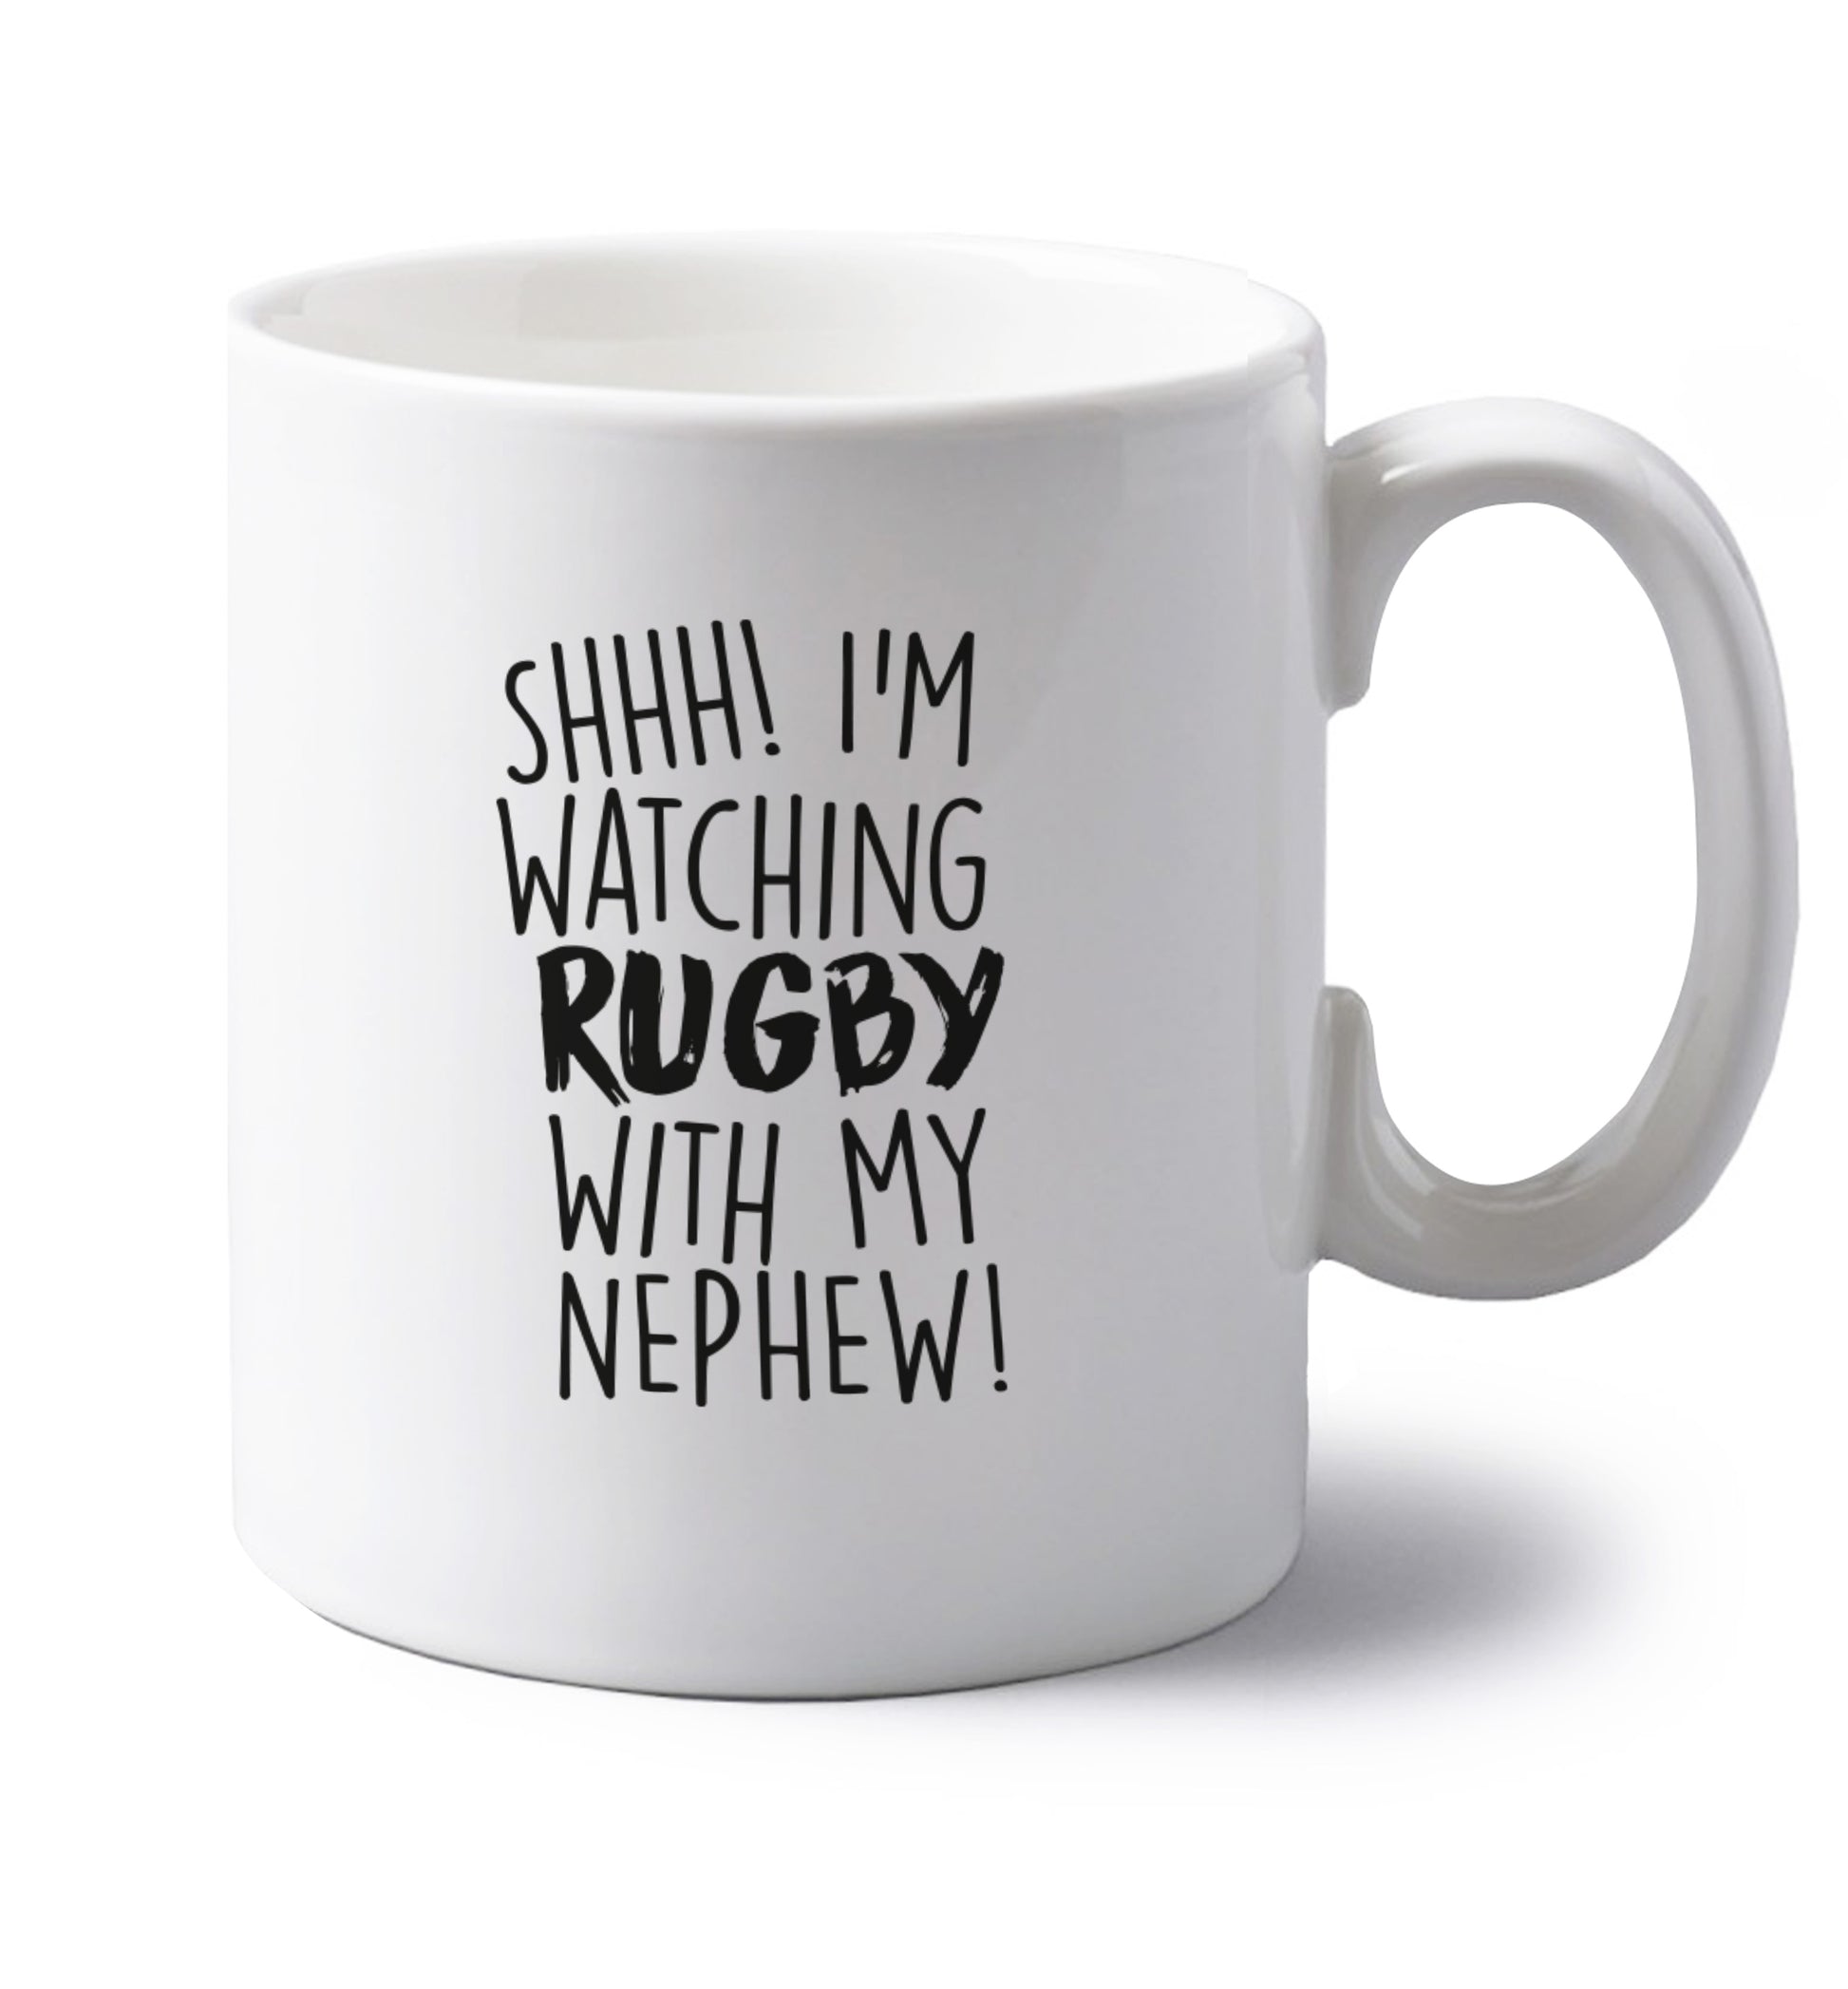 Shh.. I'm watching rugby with my nephew left handed white ceramic mug 